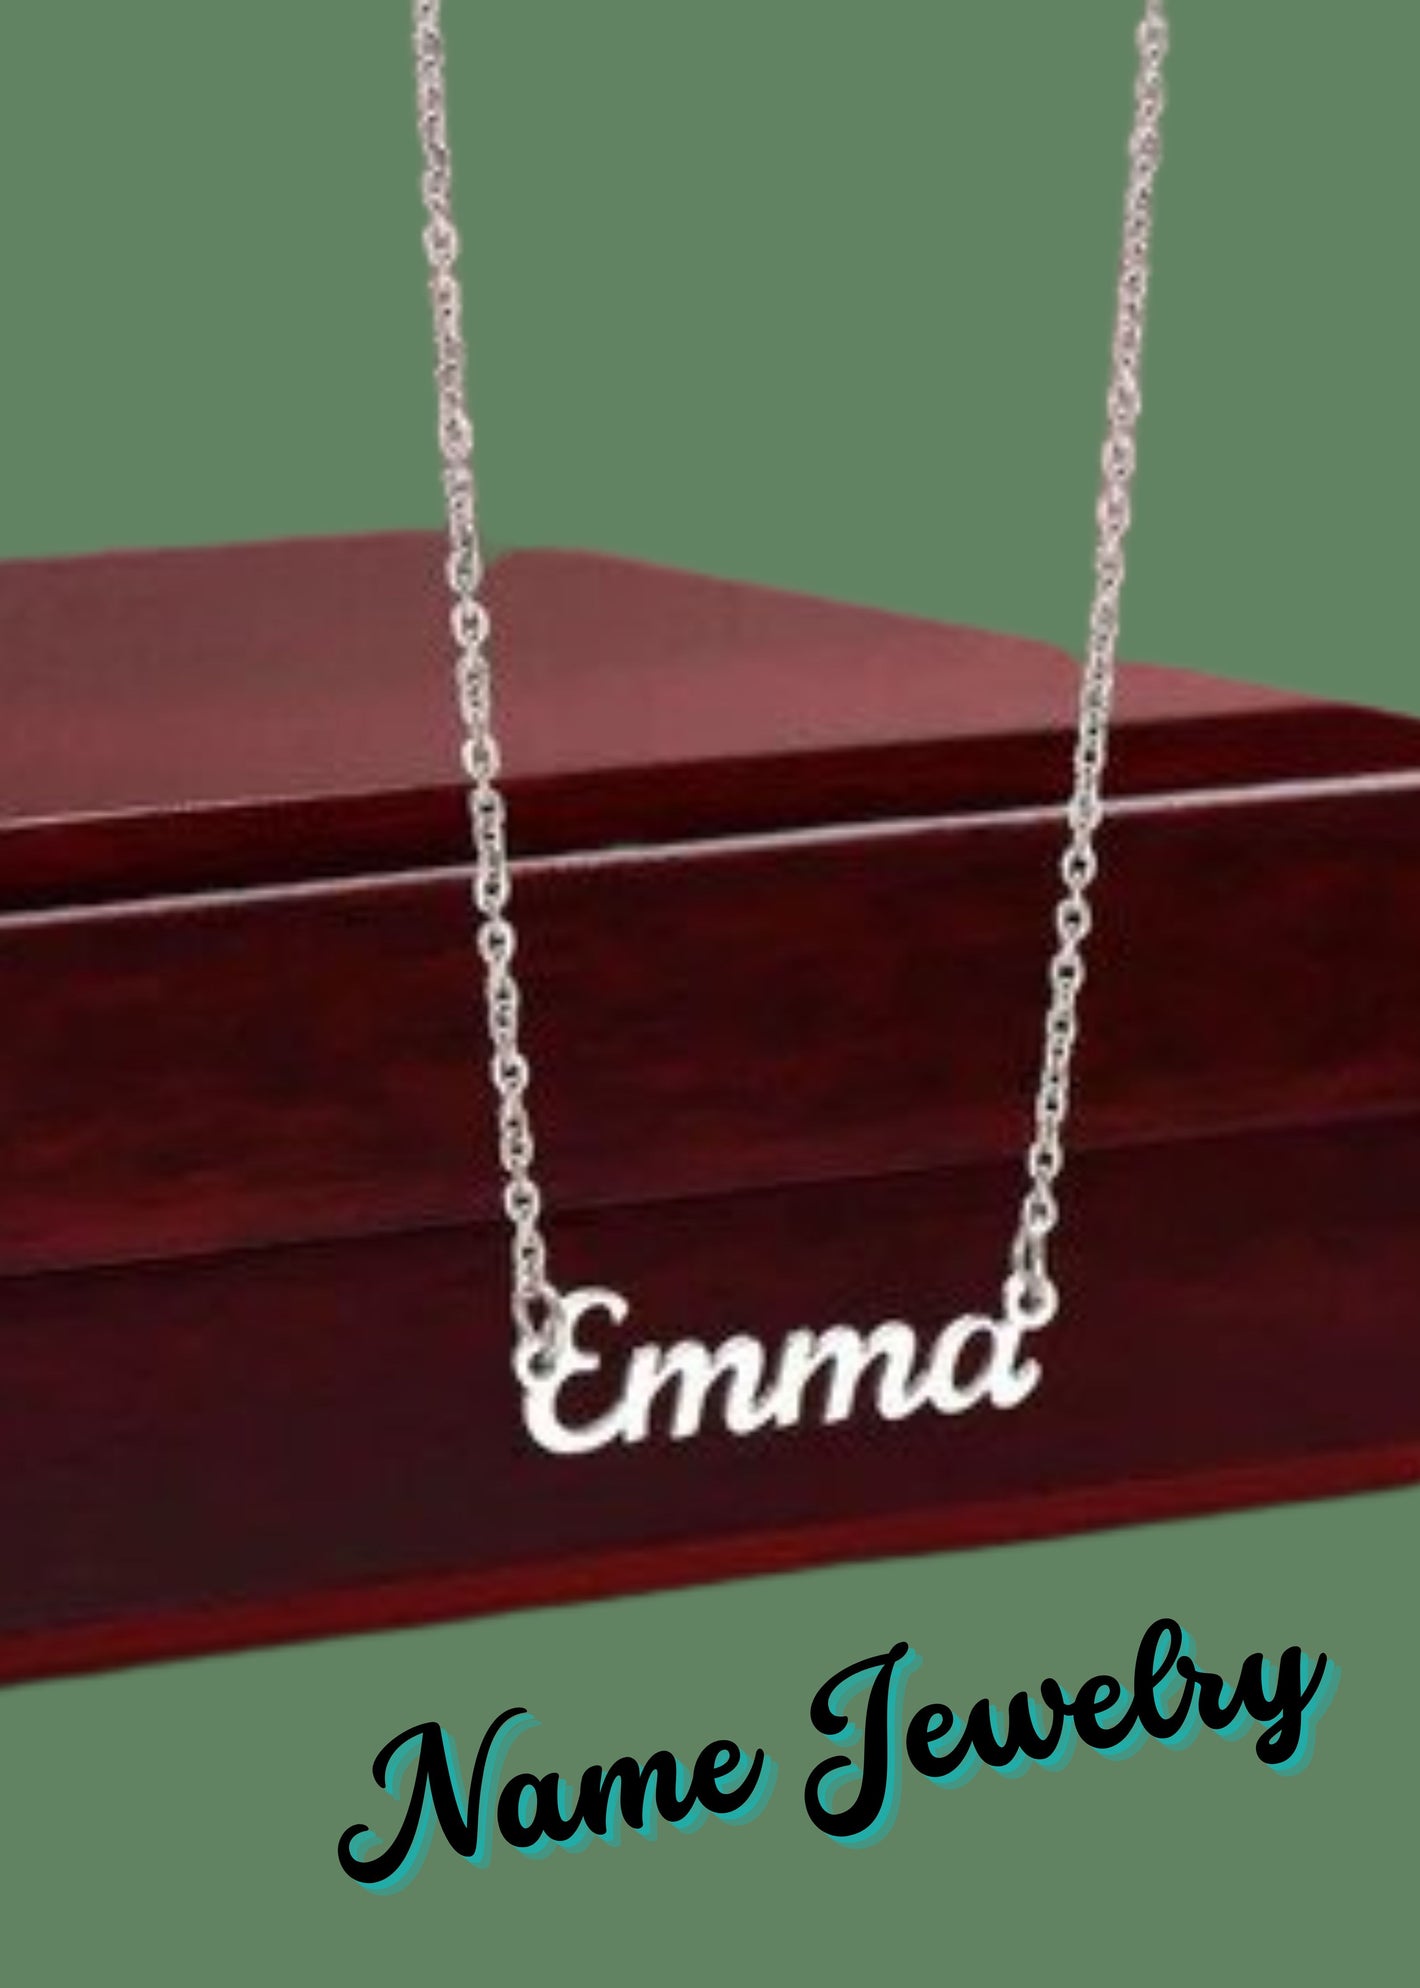 Mahagony Jewelry box with hanging name necklace Emma from our collection of name necklaces